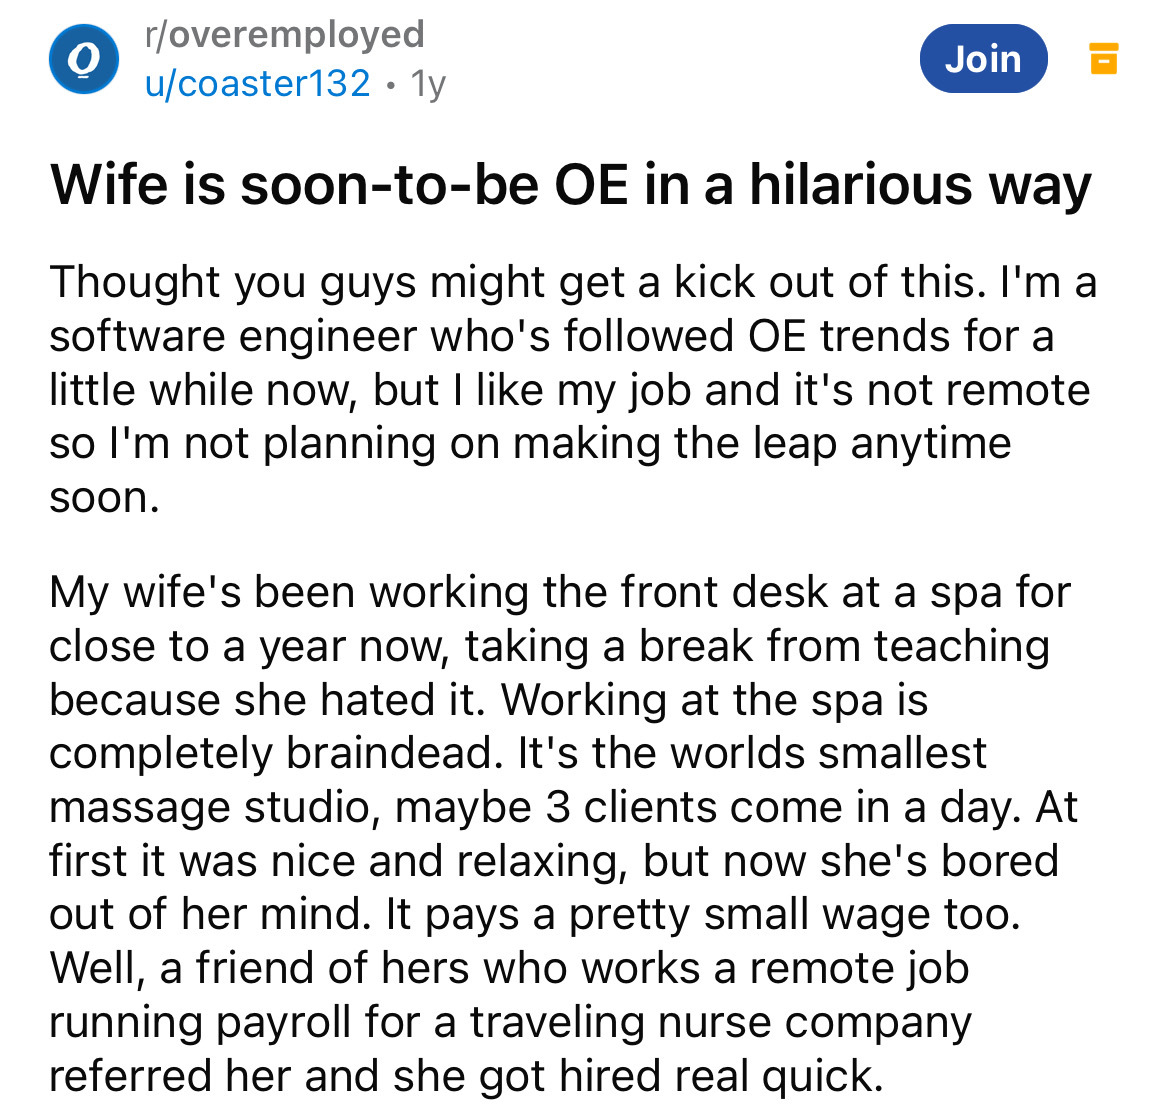 document - O roveremployed ucoaster132. 1y Join Wife is soontobe Oe in a hilarious way Thought you guys might get a kick out of this. I'm a software engineer who's ed Oe trends for a little while now, but I my job and it's not remote so I'm not planning o